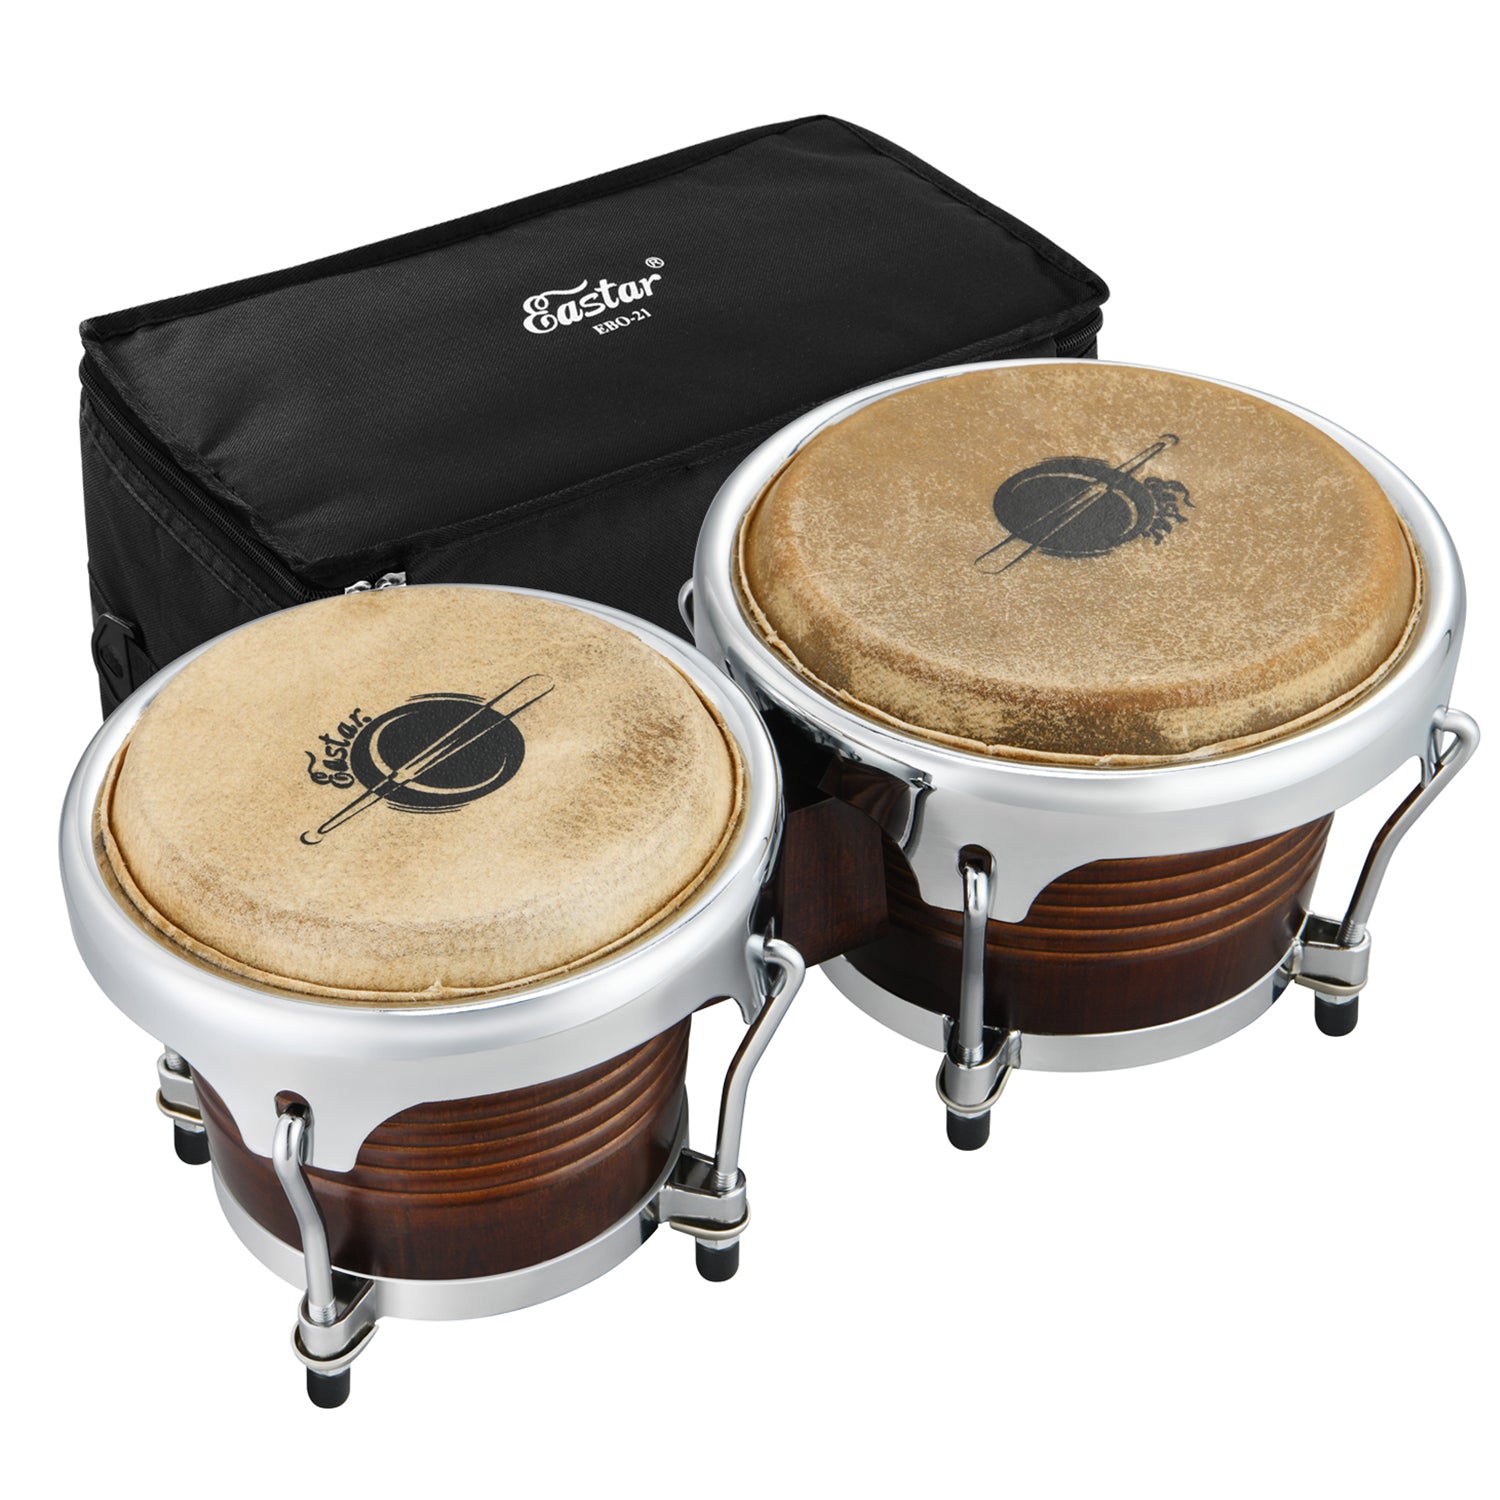 

Eastar EBO-21 7 Inch and 8 Inch Bongo Drums for Beginners with Carrying case/Professional Special Antique Finish